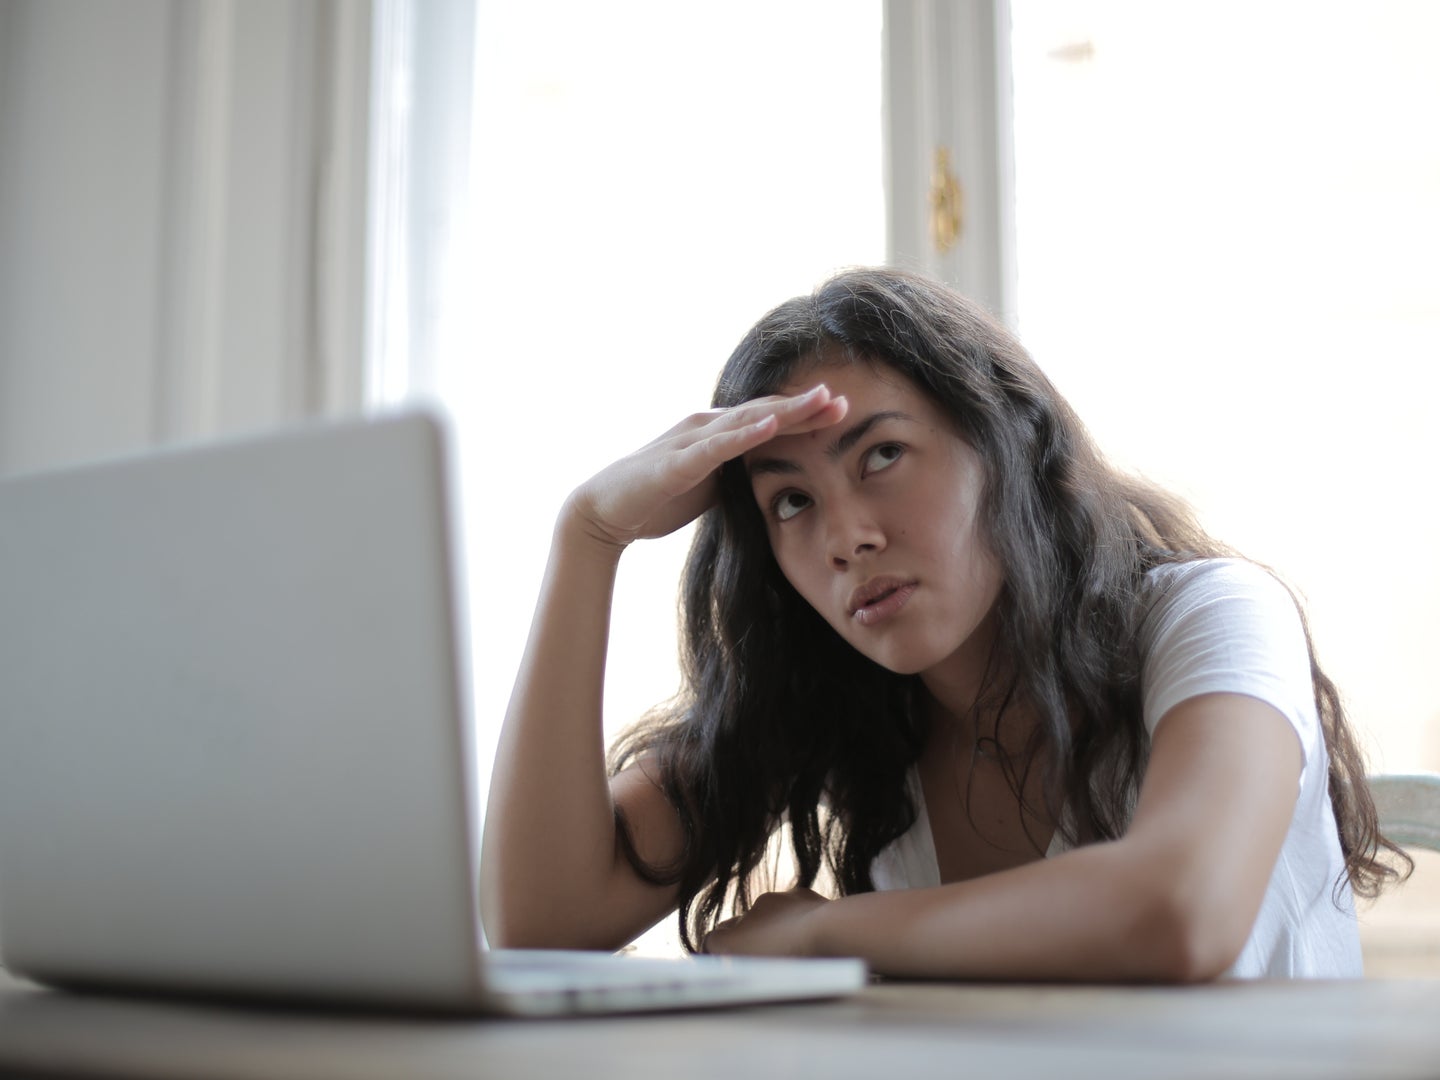 A woman leaning over a laptop computer, annoyed, with her hand on her forehead.